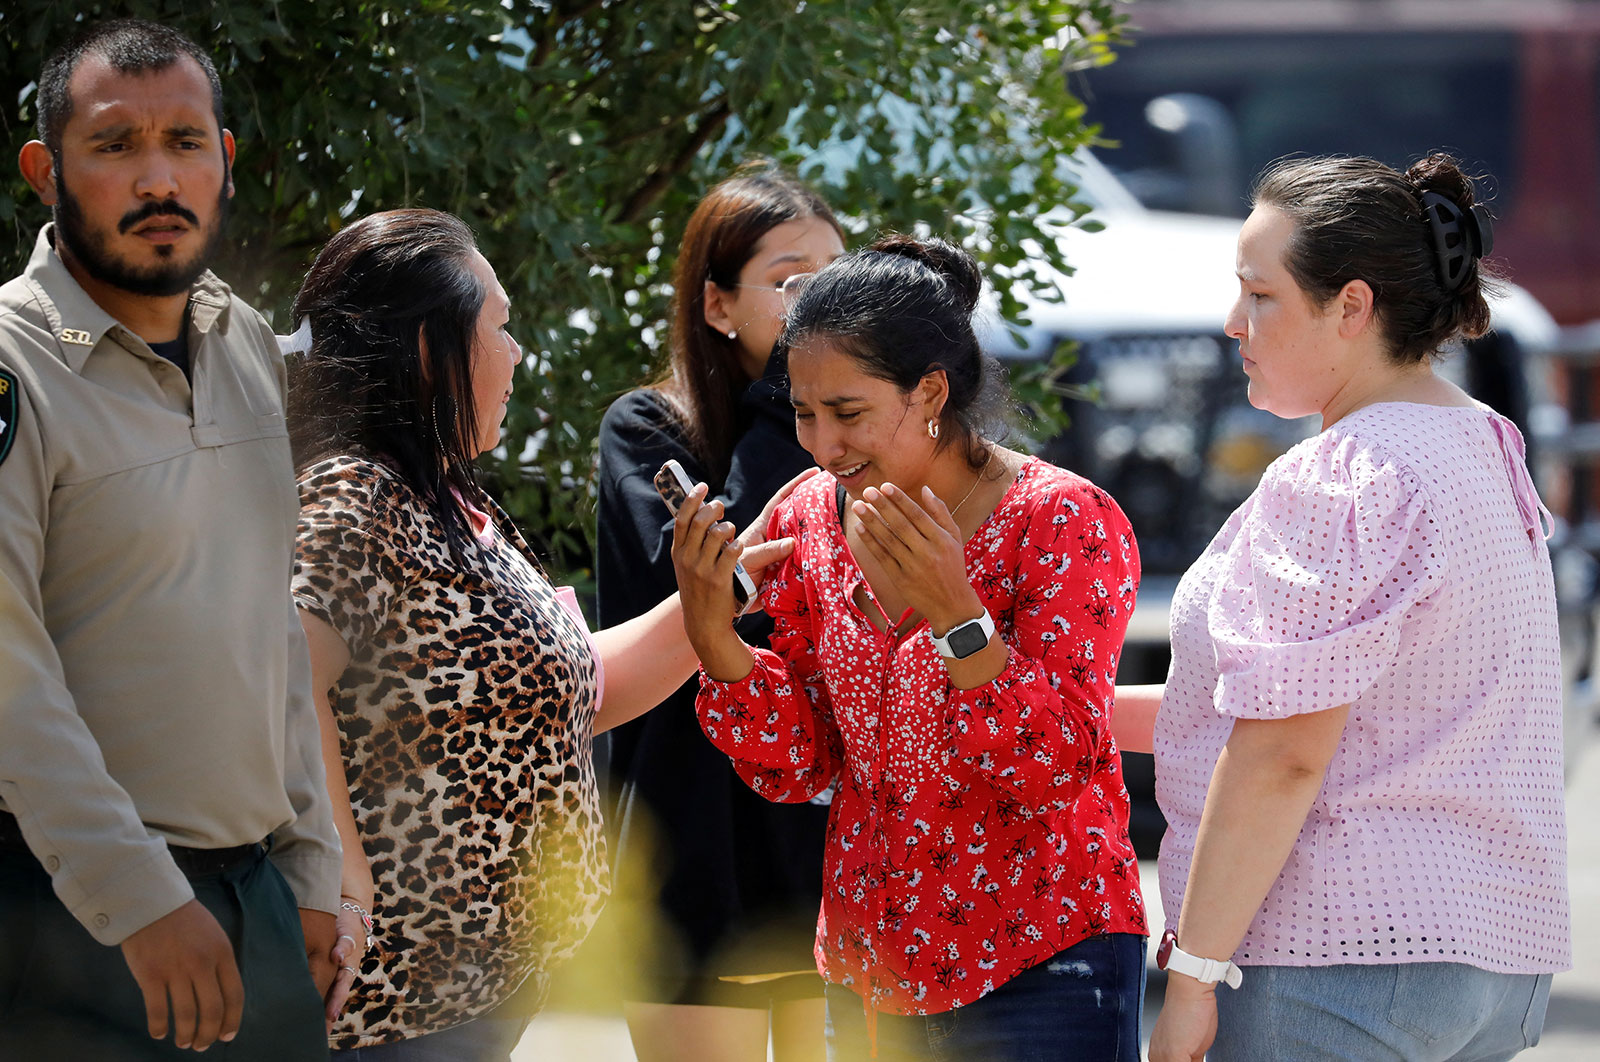 Texas elementary school shooting marks at least the 30th shooting at a K-12 school in 2022